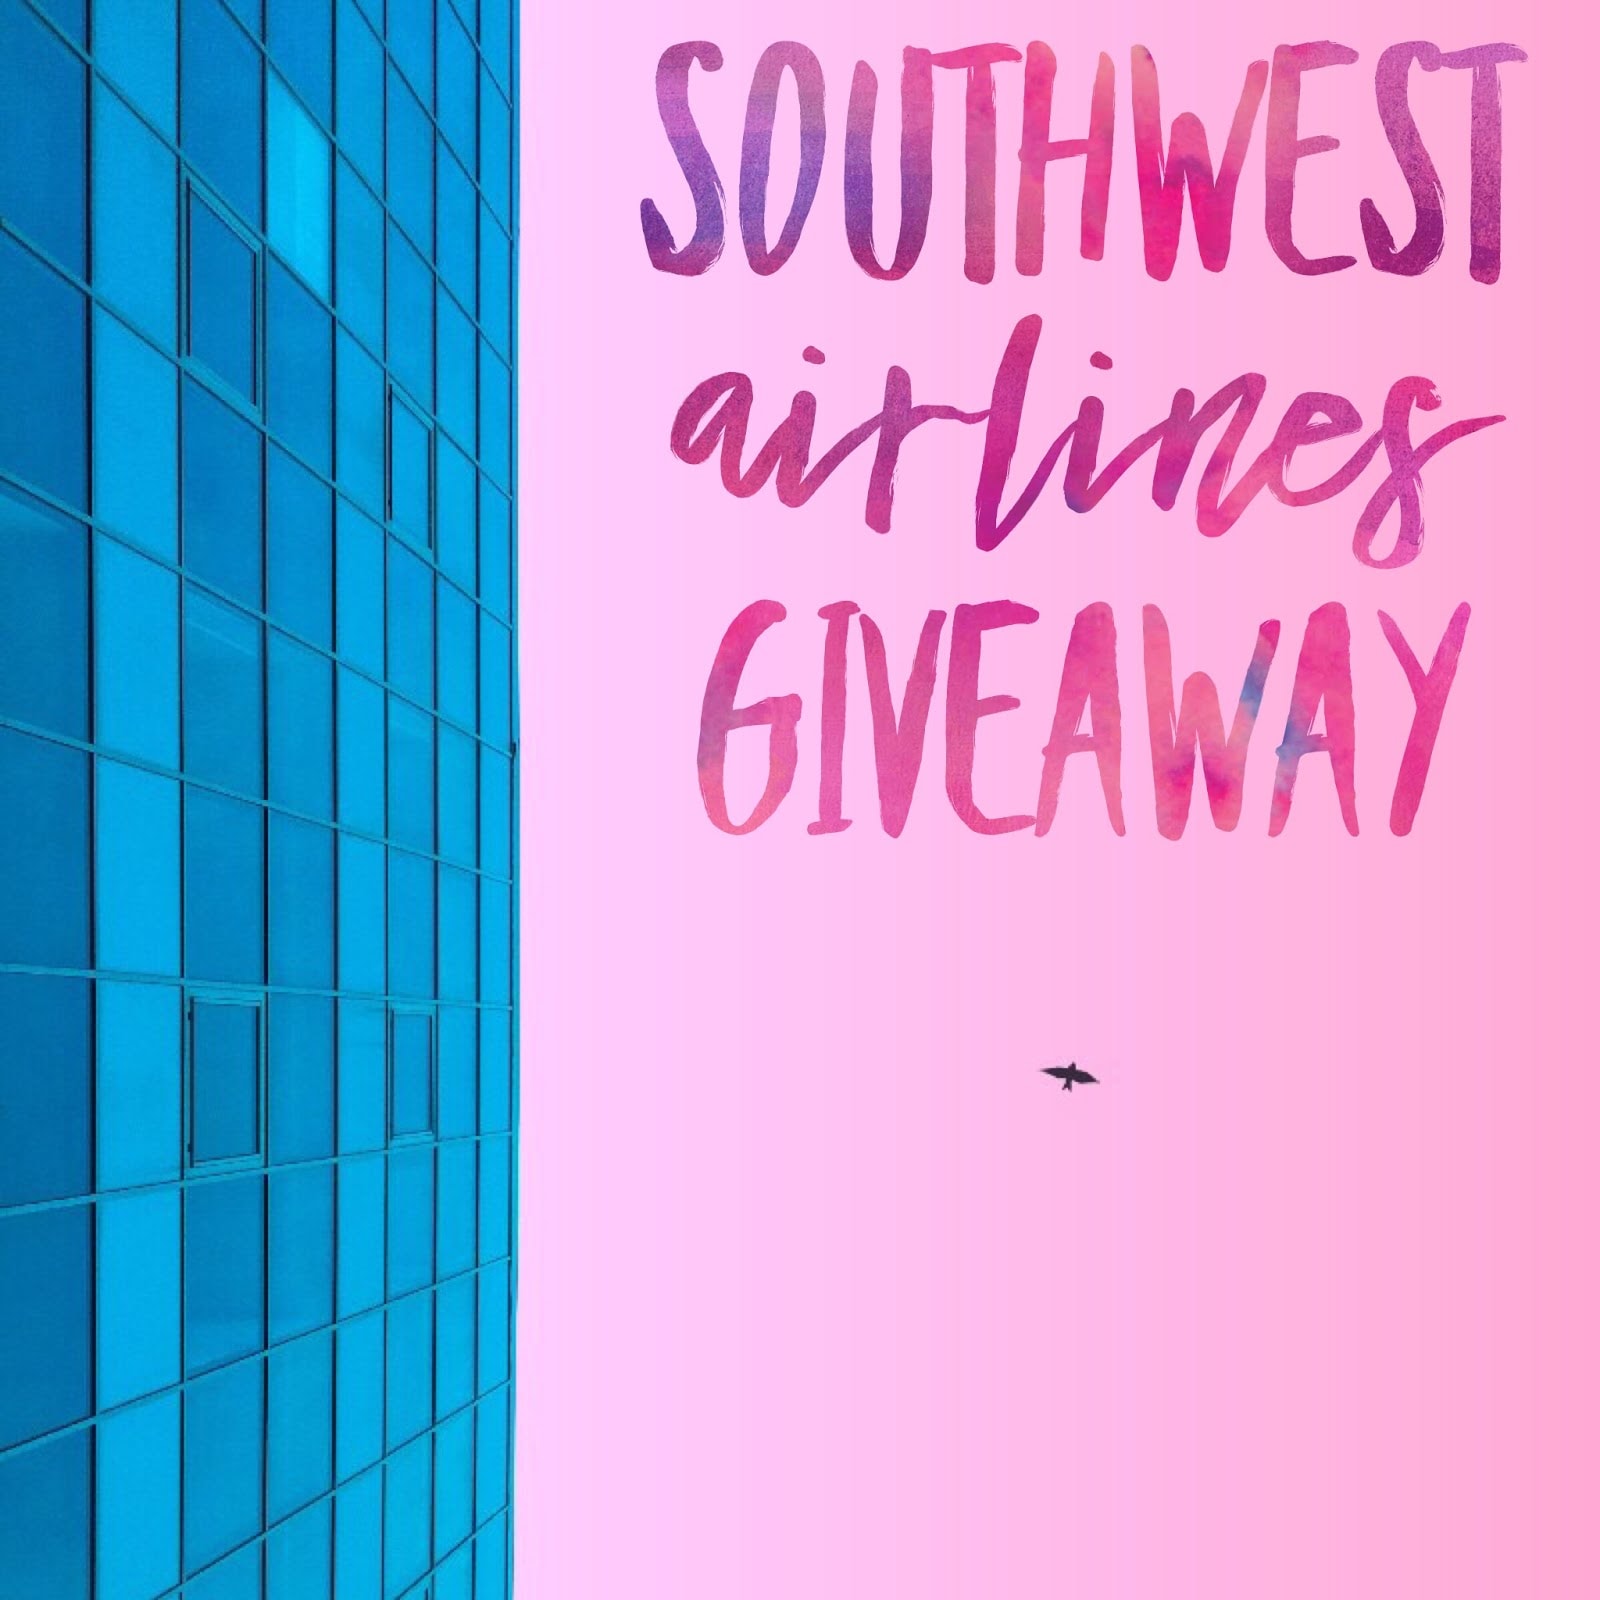 April Southwest Airlines Giveaway ends May 17, 2018